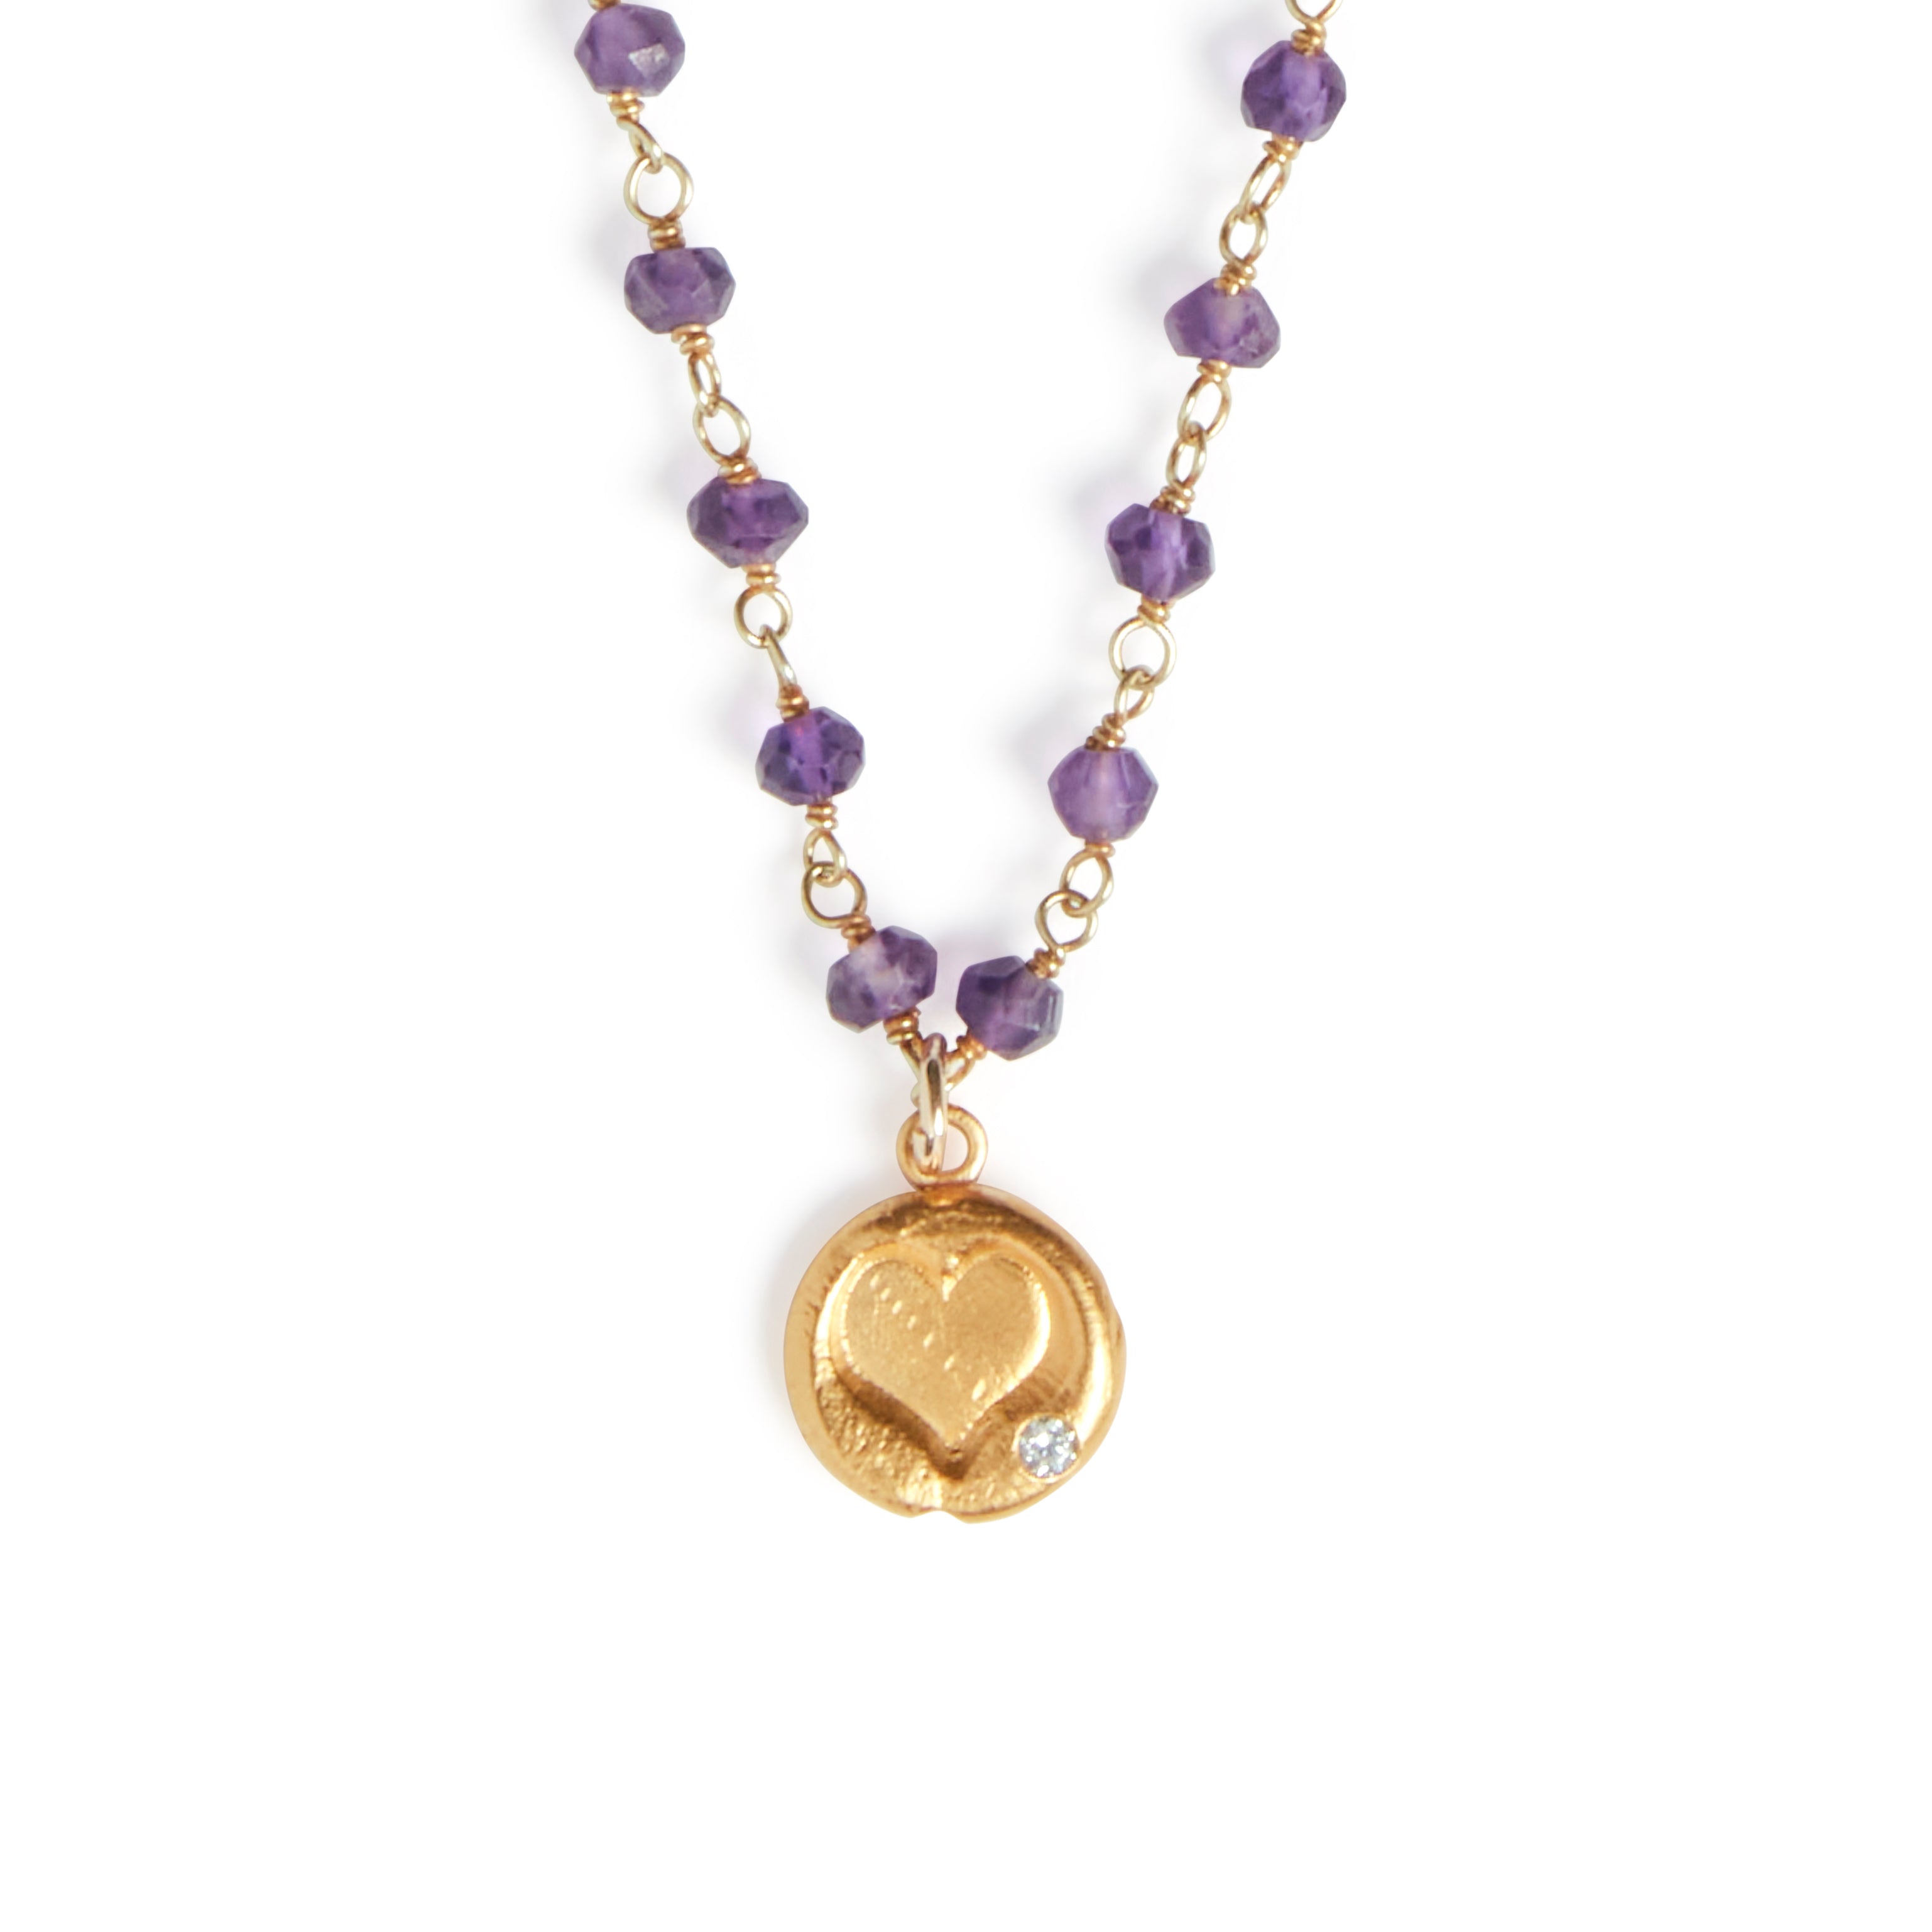 Heart Charm on Purple Amethyst Chain Necklace Gold